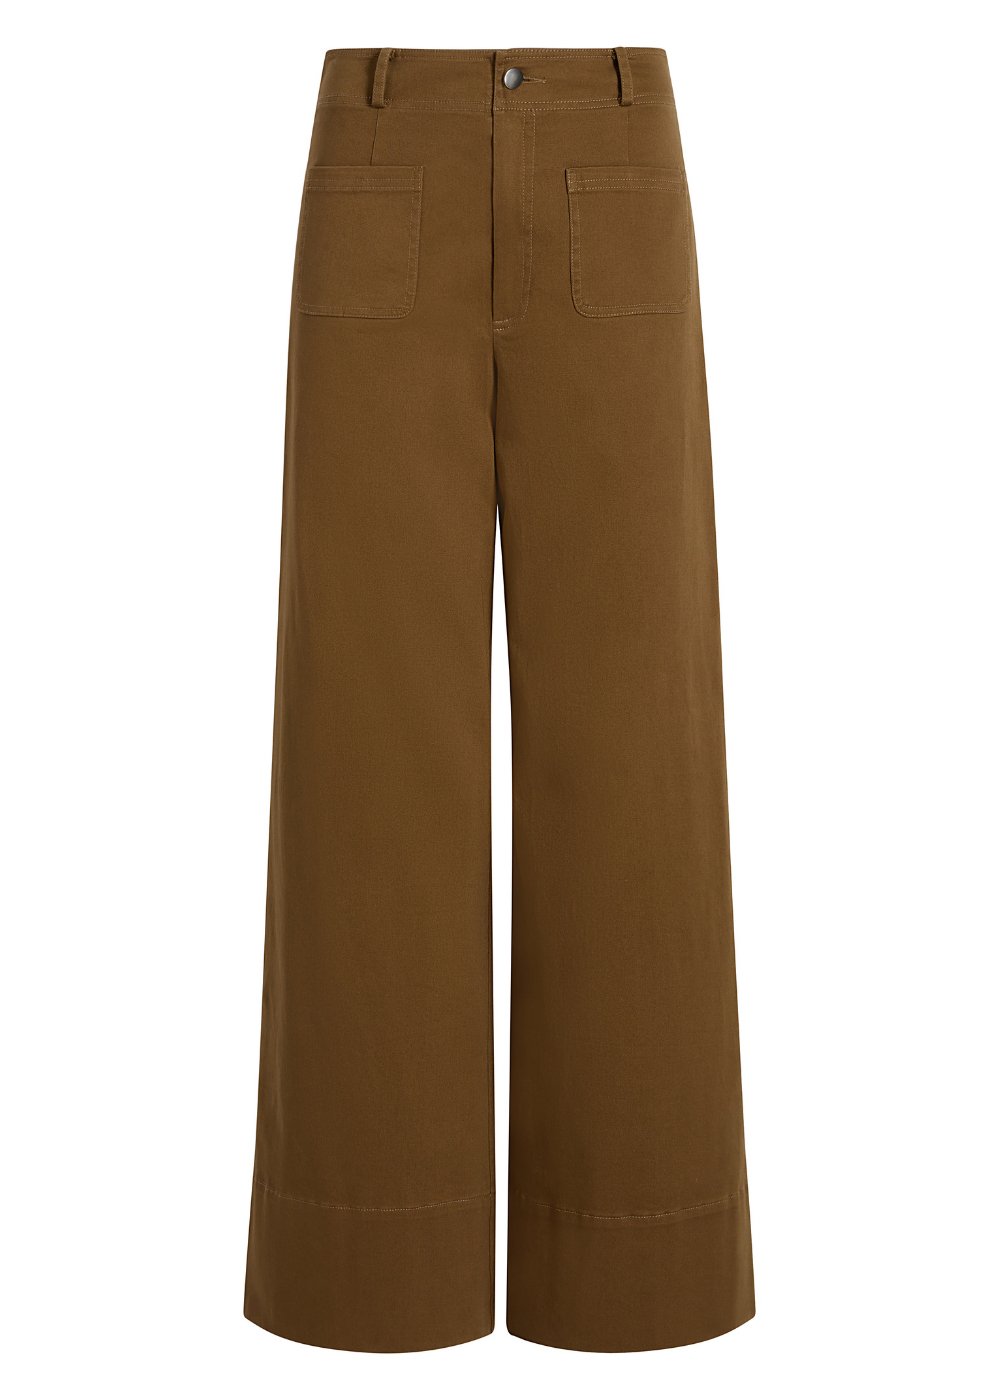 The Harper Pant - Solid & Striped